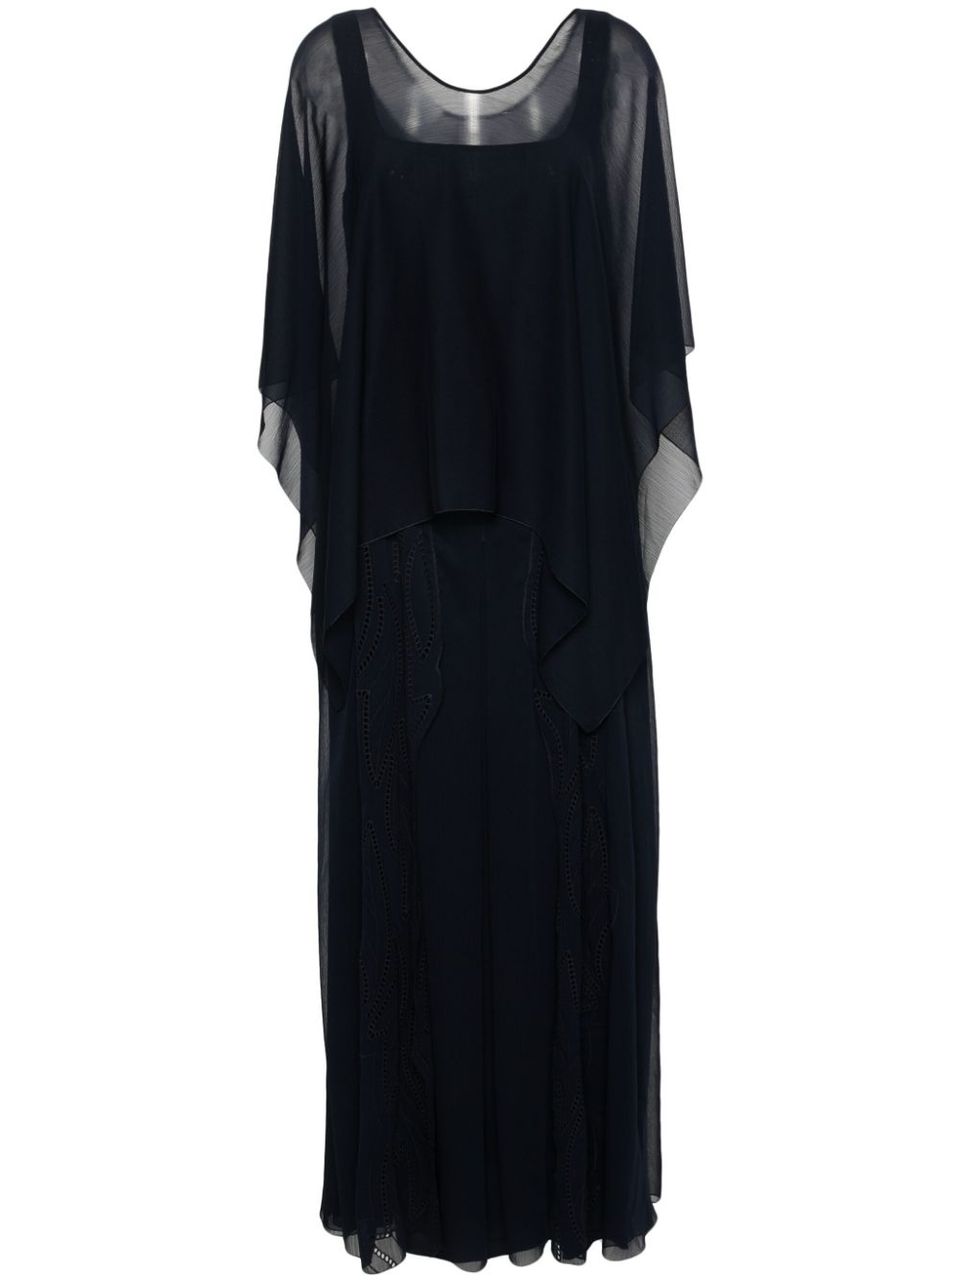 Sleeveless evening gown with cape